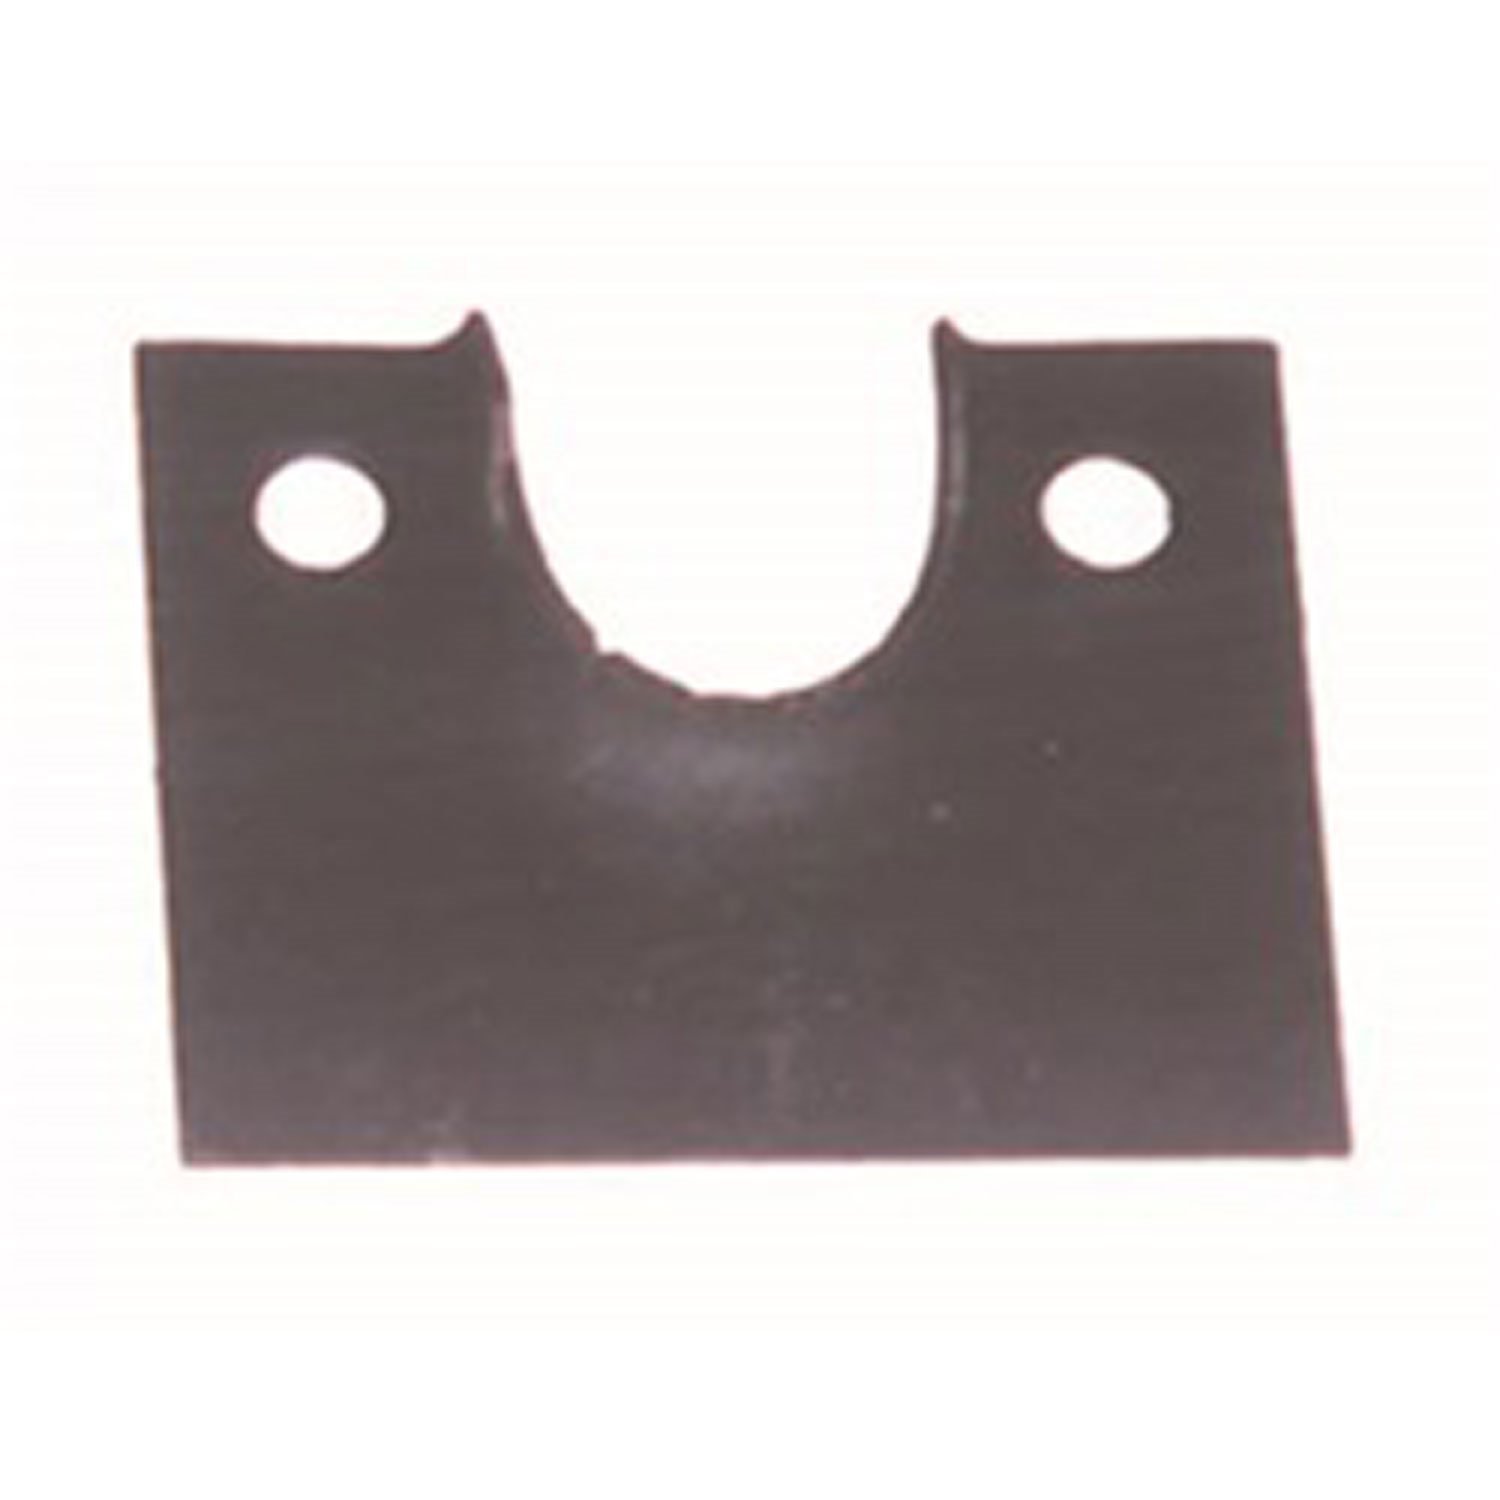 This reproduction rear seat pivot bracket from Omix-ADA